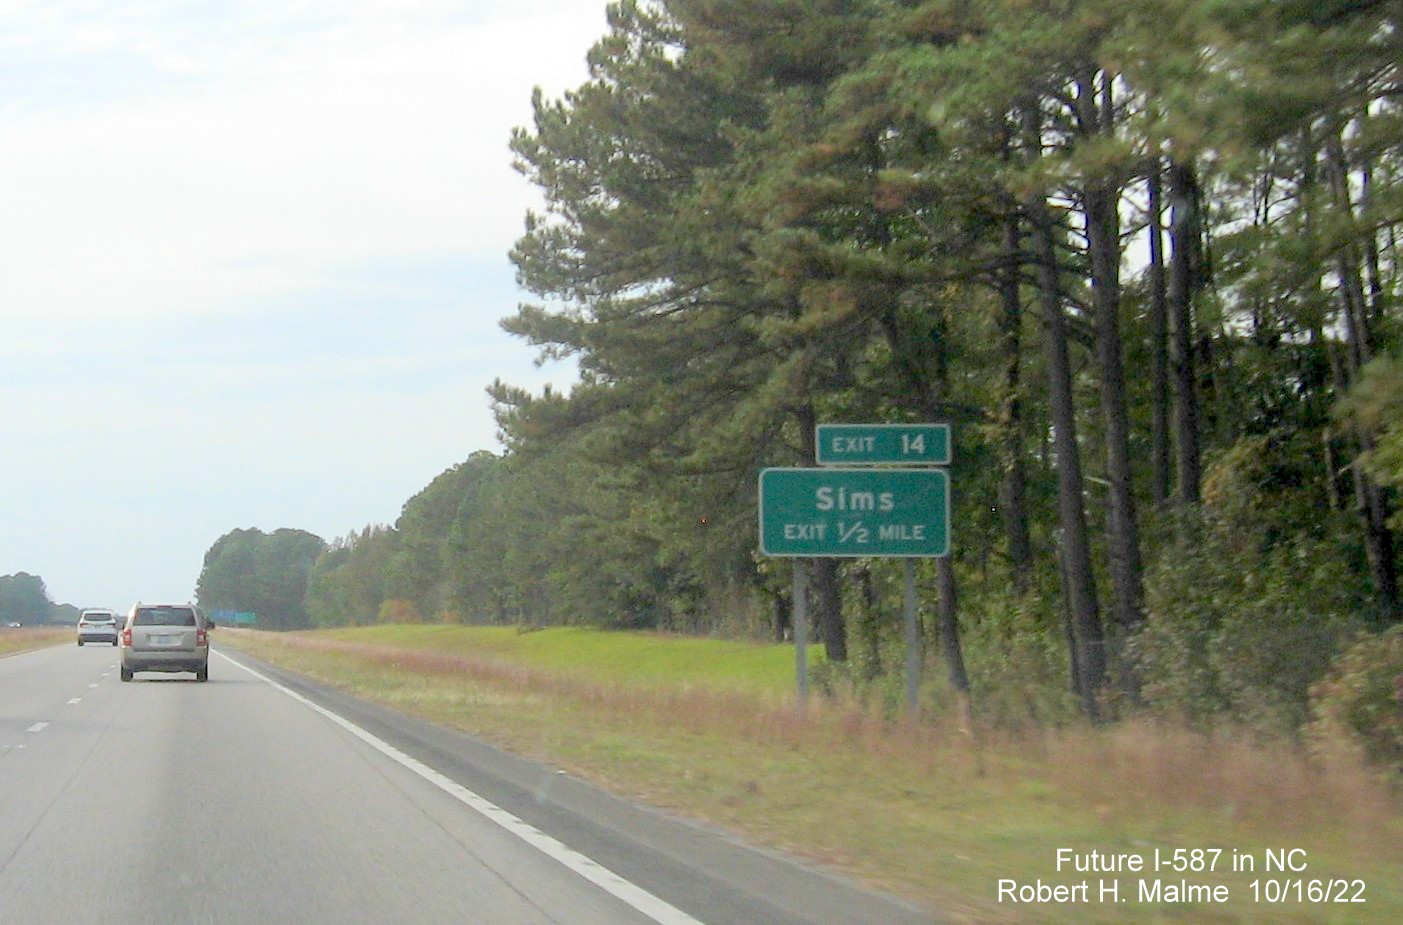 Image of ground mounted 1/2 mile advance sign for Sims exit with new I-587 milepost exit number on US 264 East in Sims, October 2022